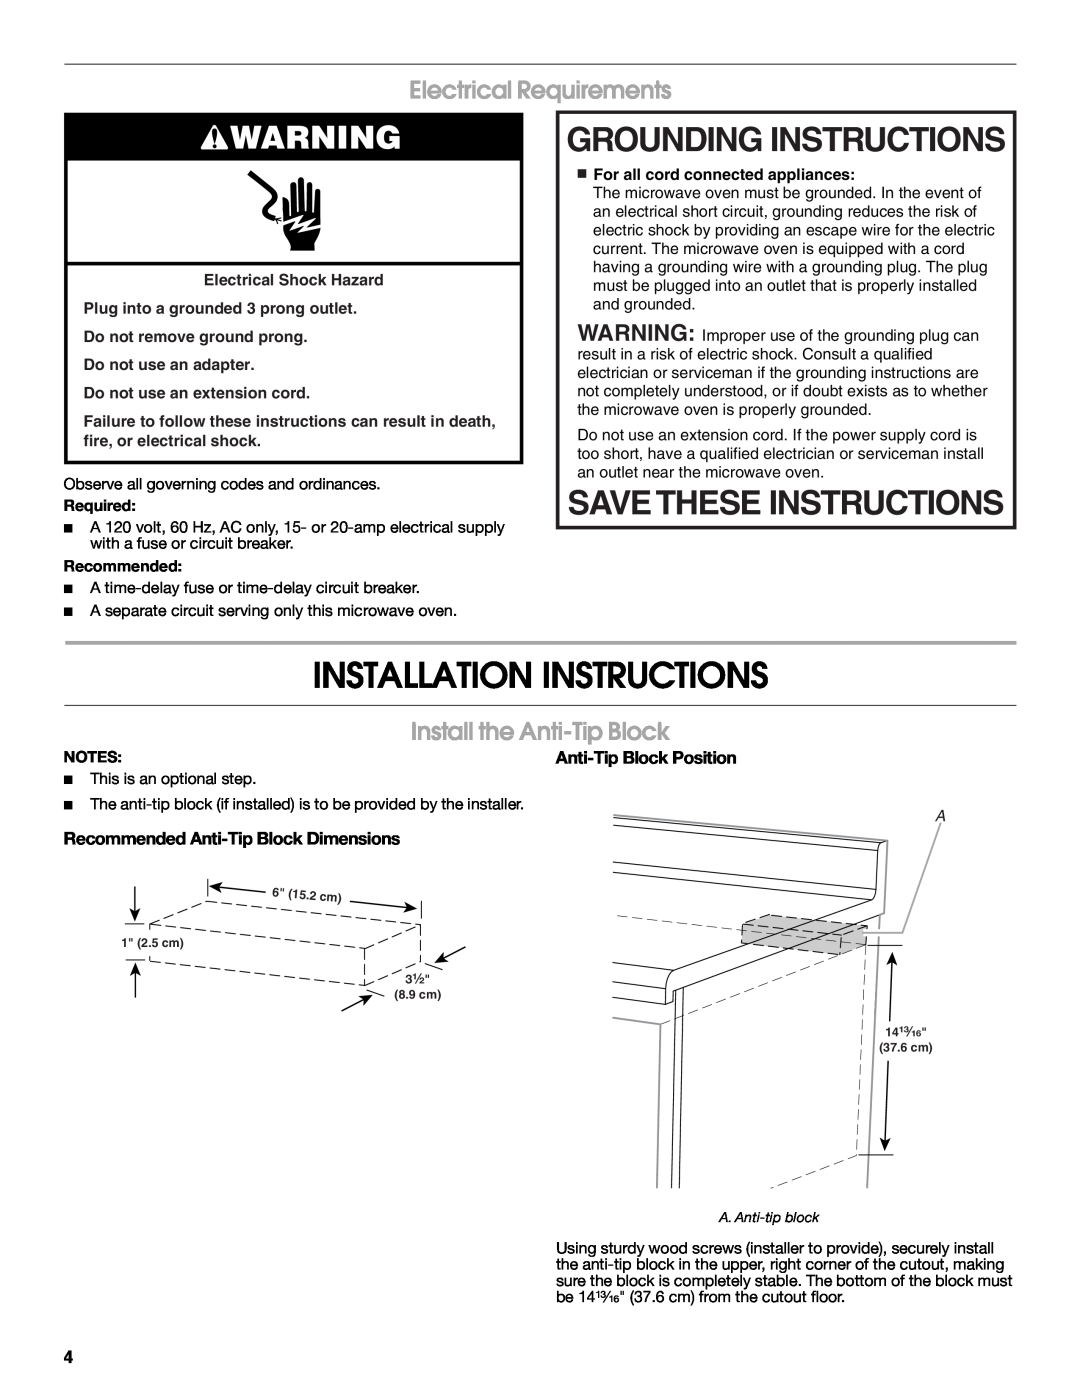 Whirlpool W10531851A Grounding Instructions, Savethese Instructions, Electrical Requirements, Required, Recommended, Notes 